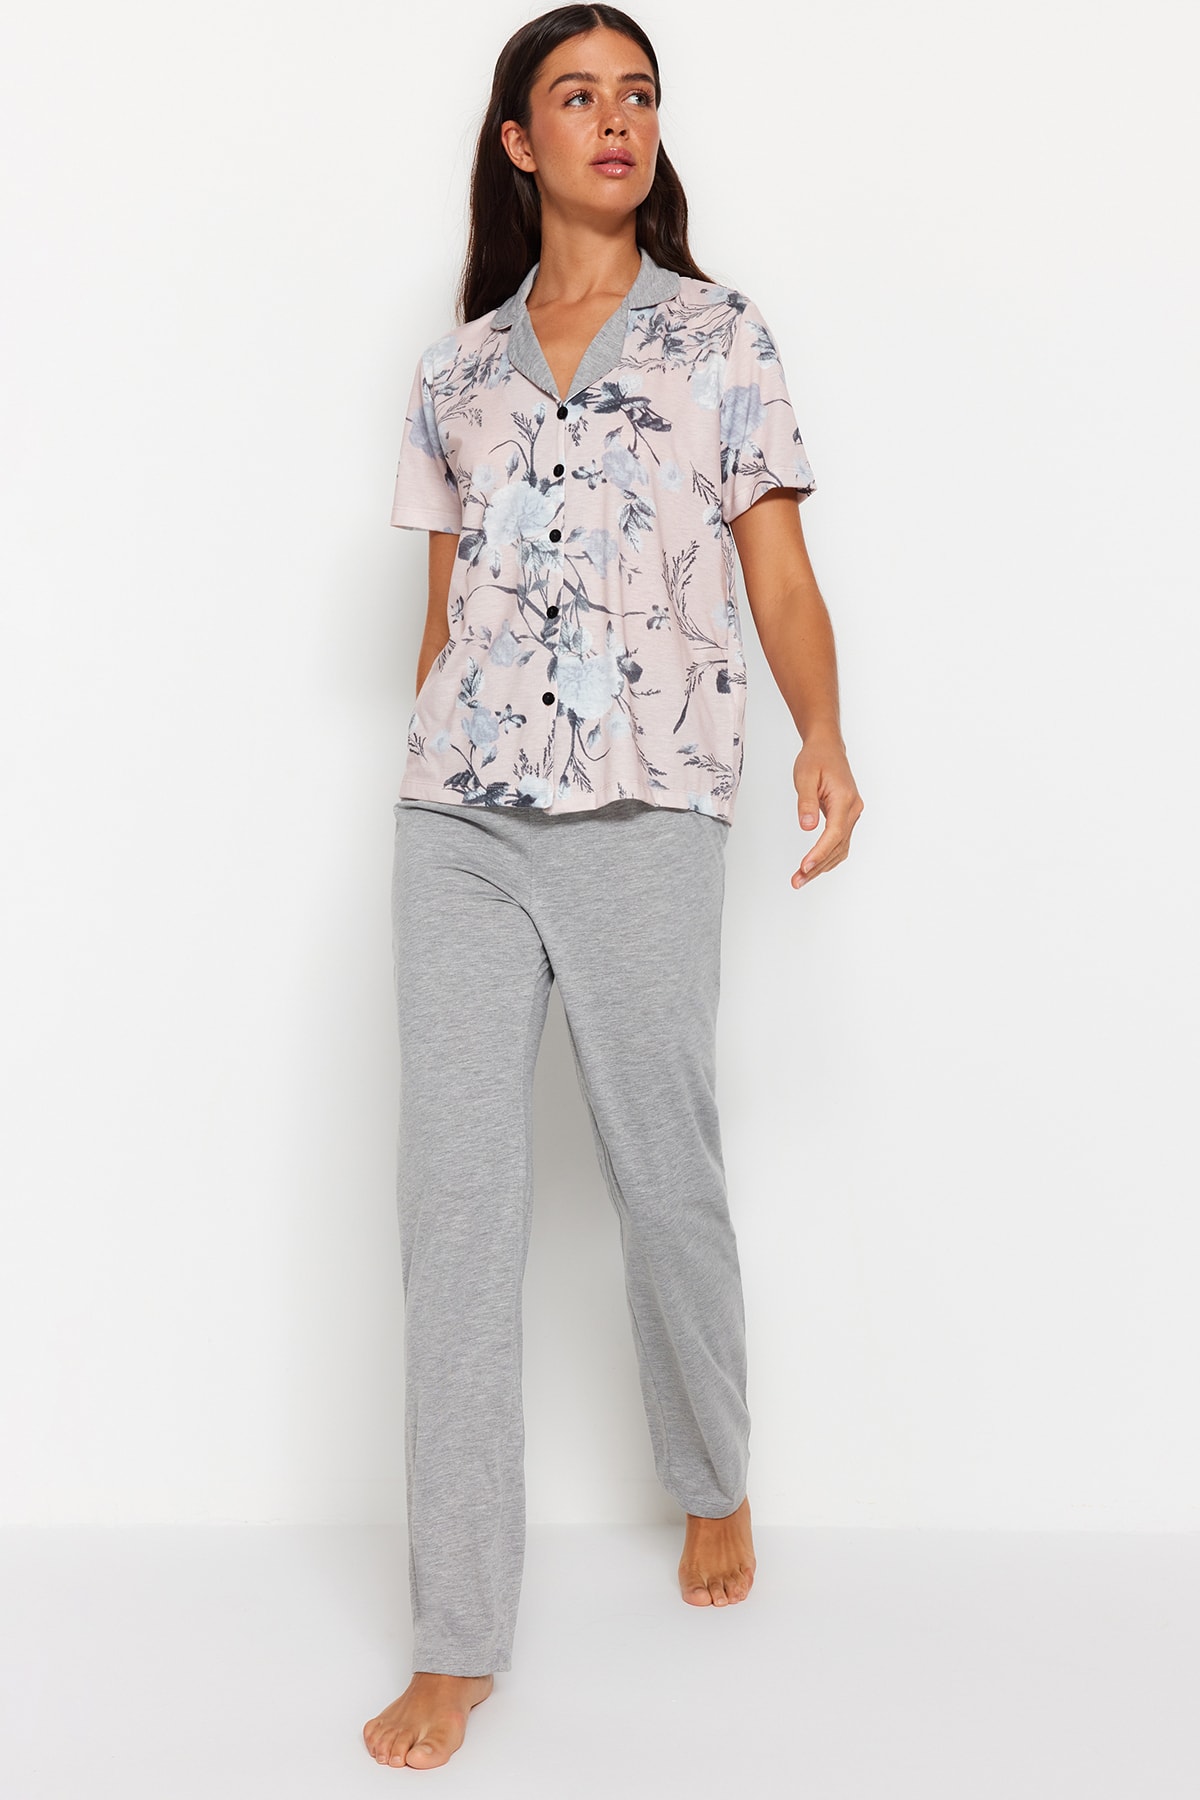 Trendyol Gray 100% Cotton Floral Detailed Knitted Pajamas Set